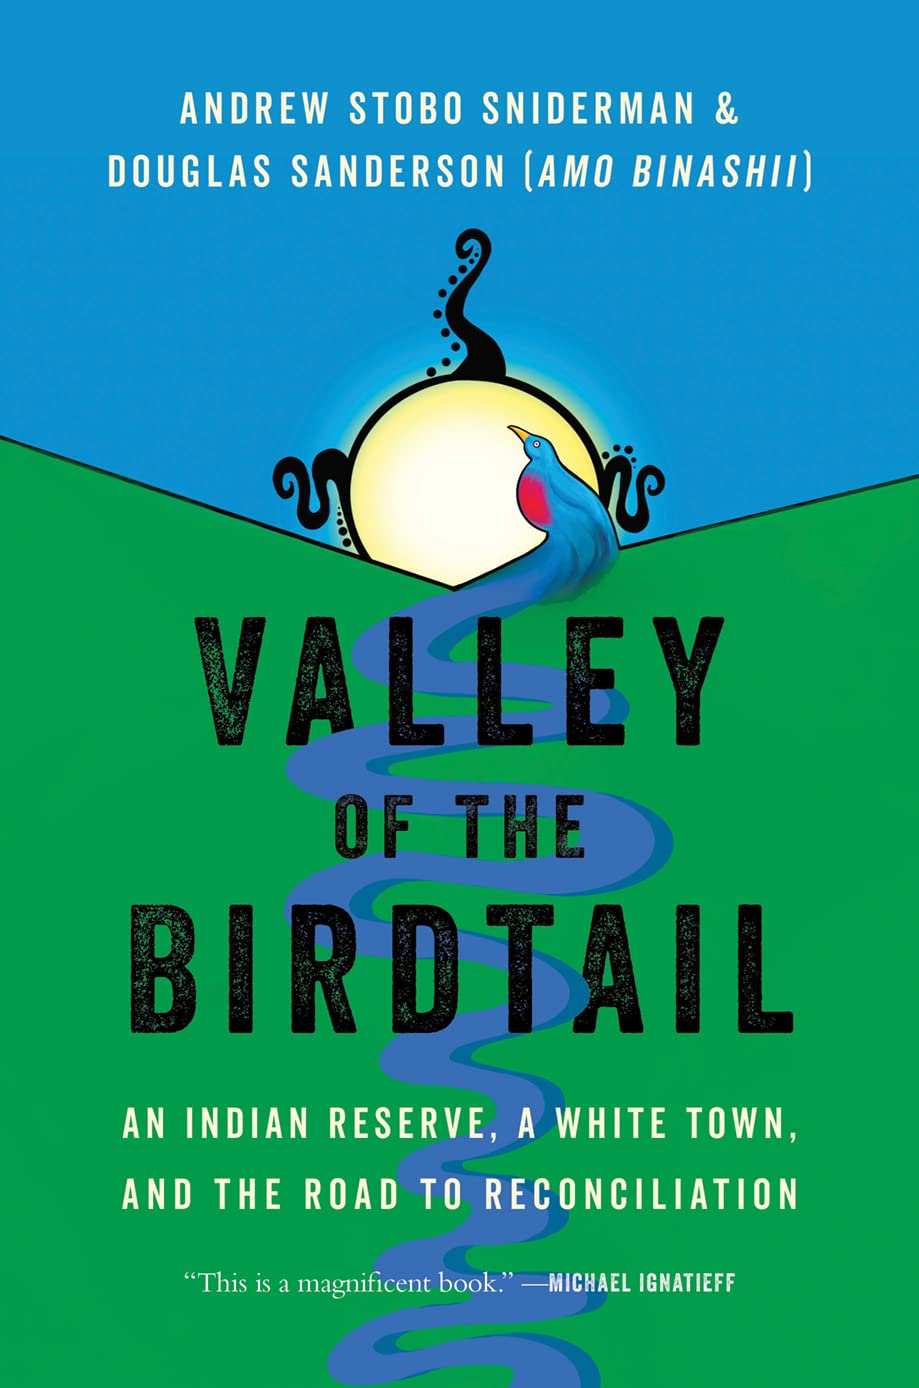 Valley Of The Birdtail: An Indian Reserve, A White Town, And The Road To Reconciliation [Andrew Stobo Sniderman & Douglas Sanderson]